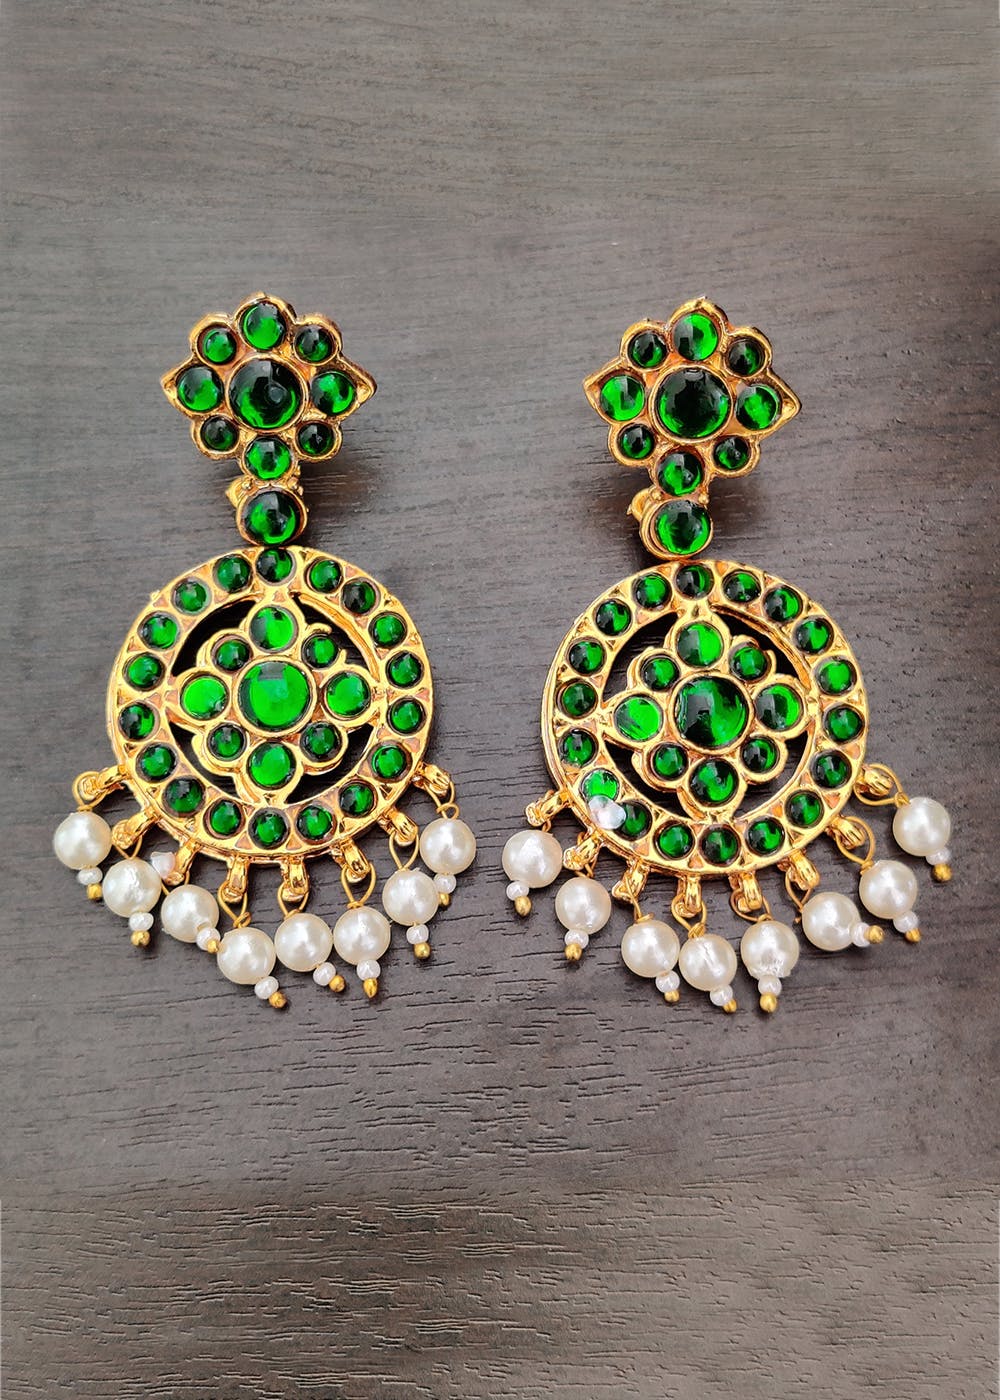 Get Temple Jewellery Style Round Dangler Earrings at ₹ 519 | LBB Shop